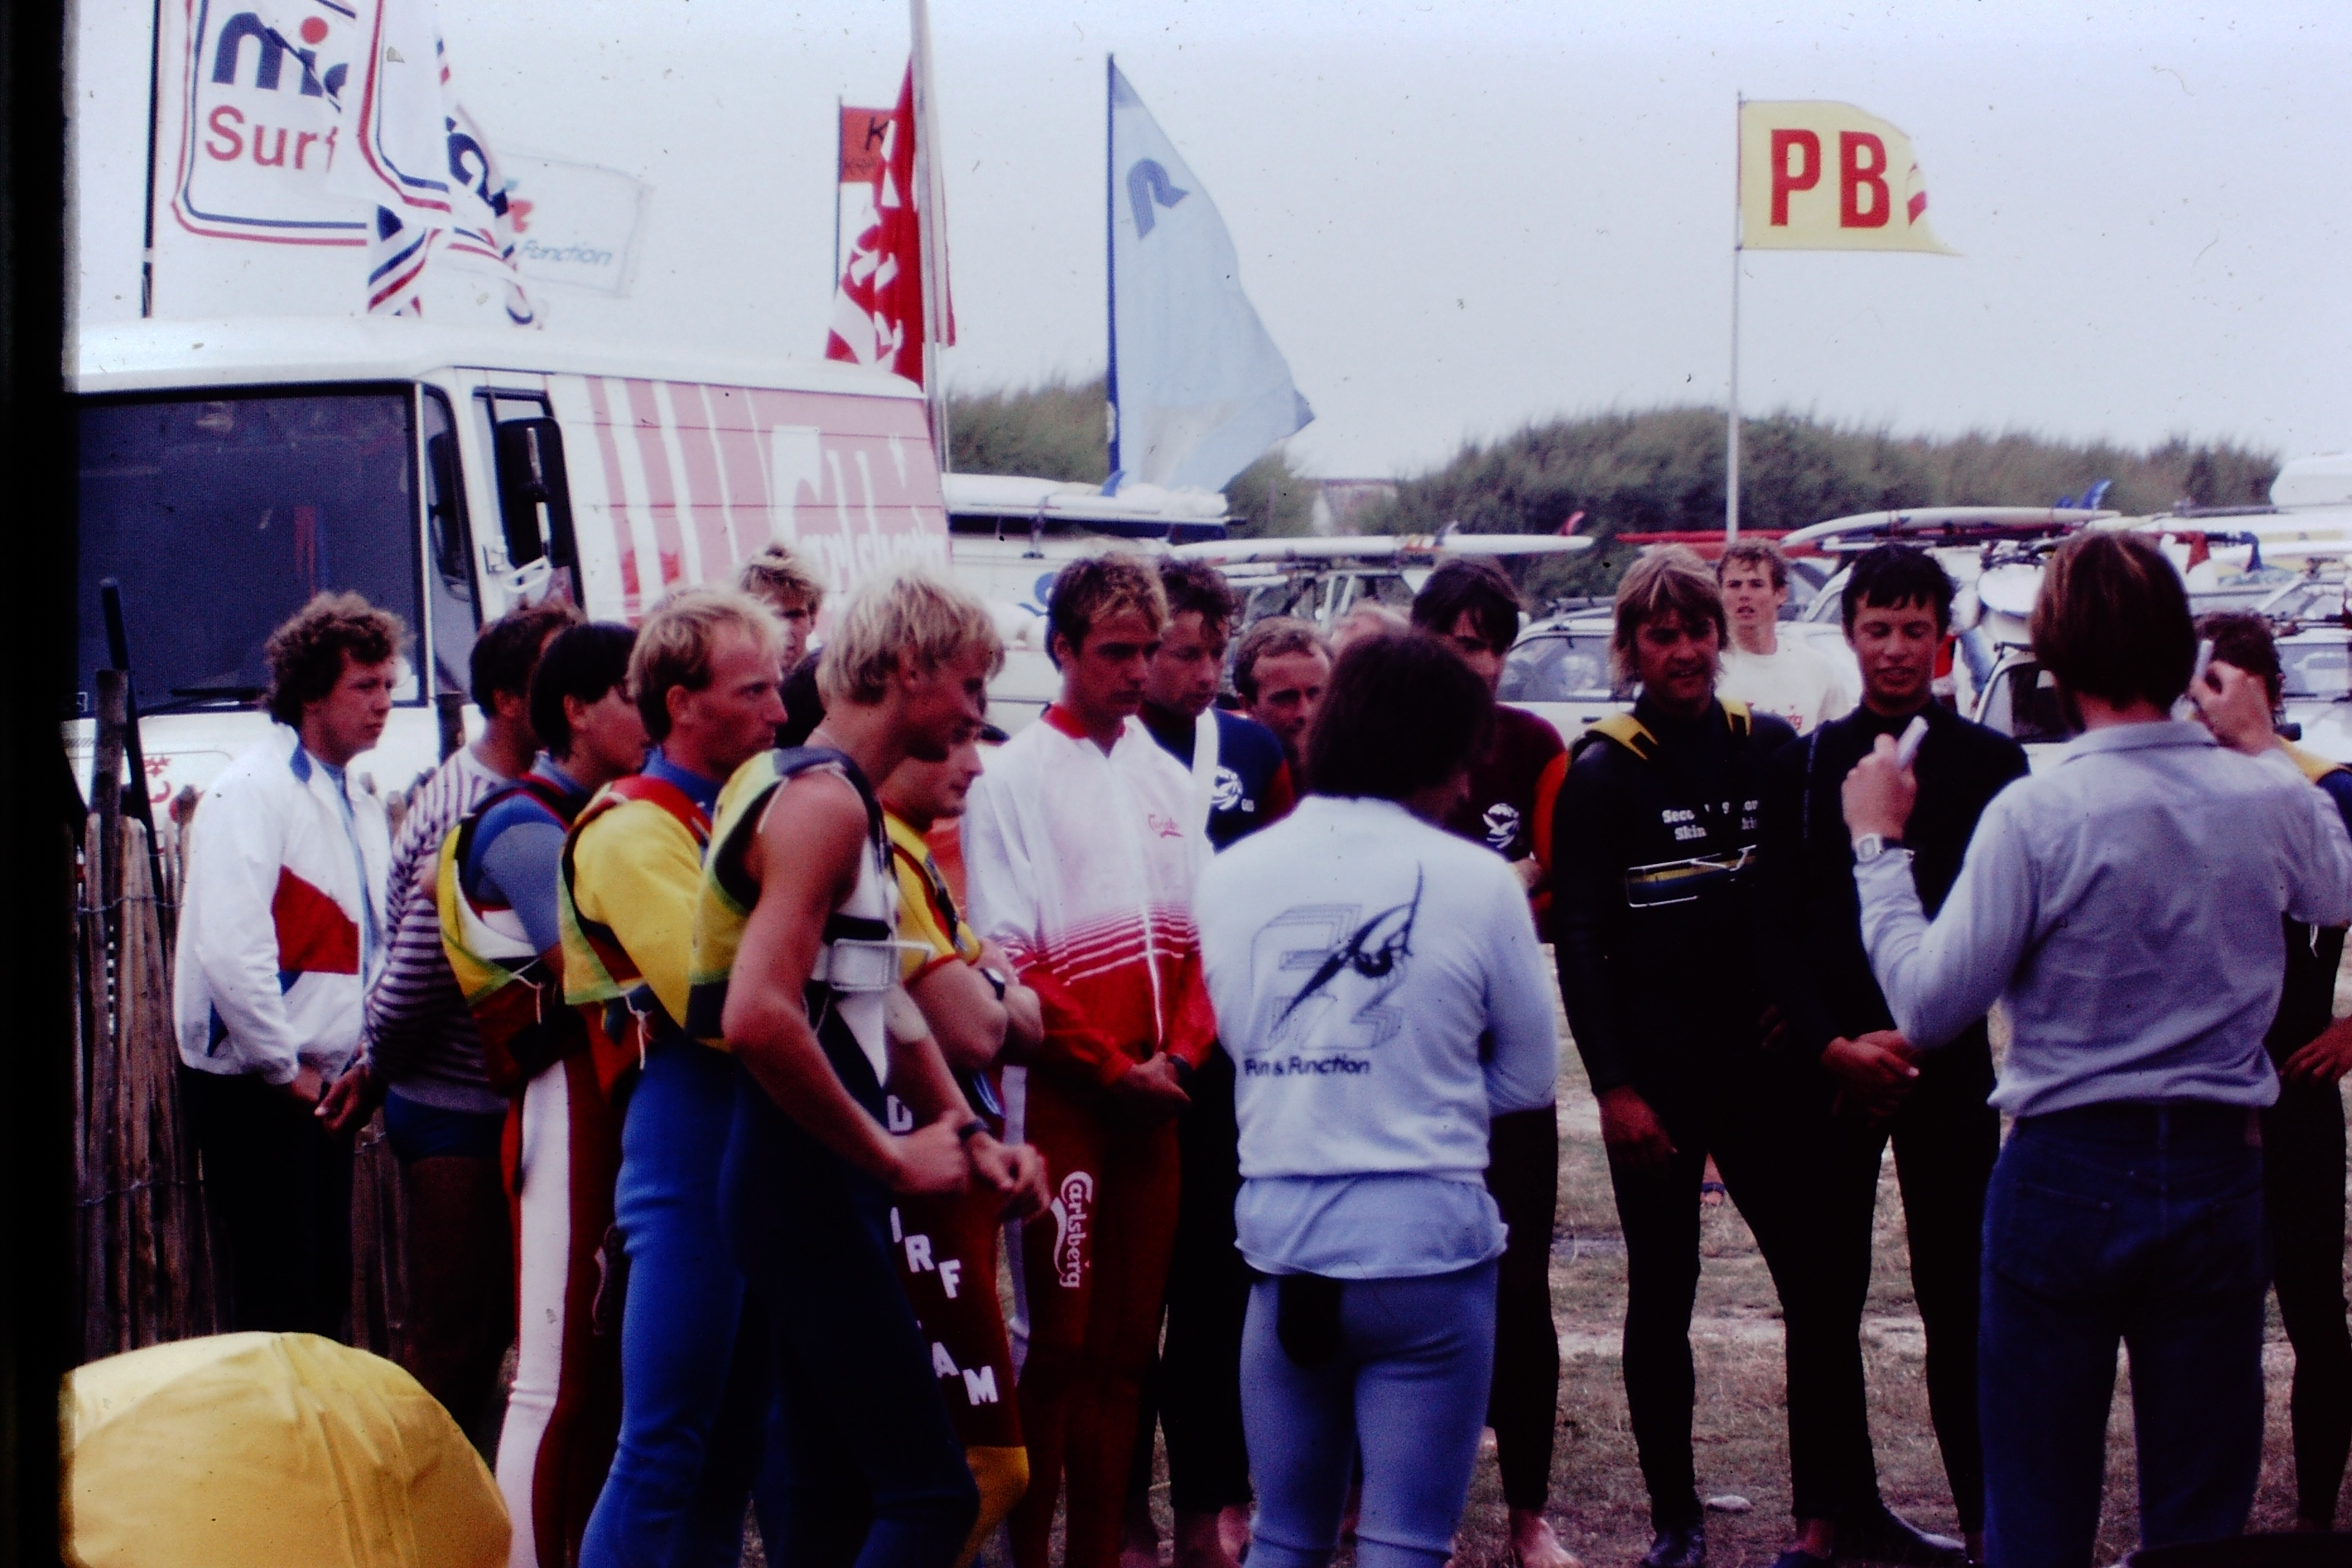 The windsurf scene at Wittering back in the day!